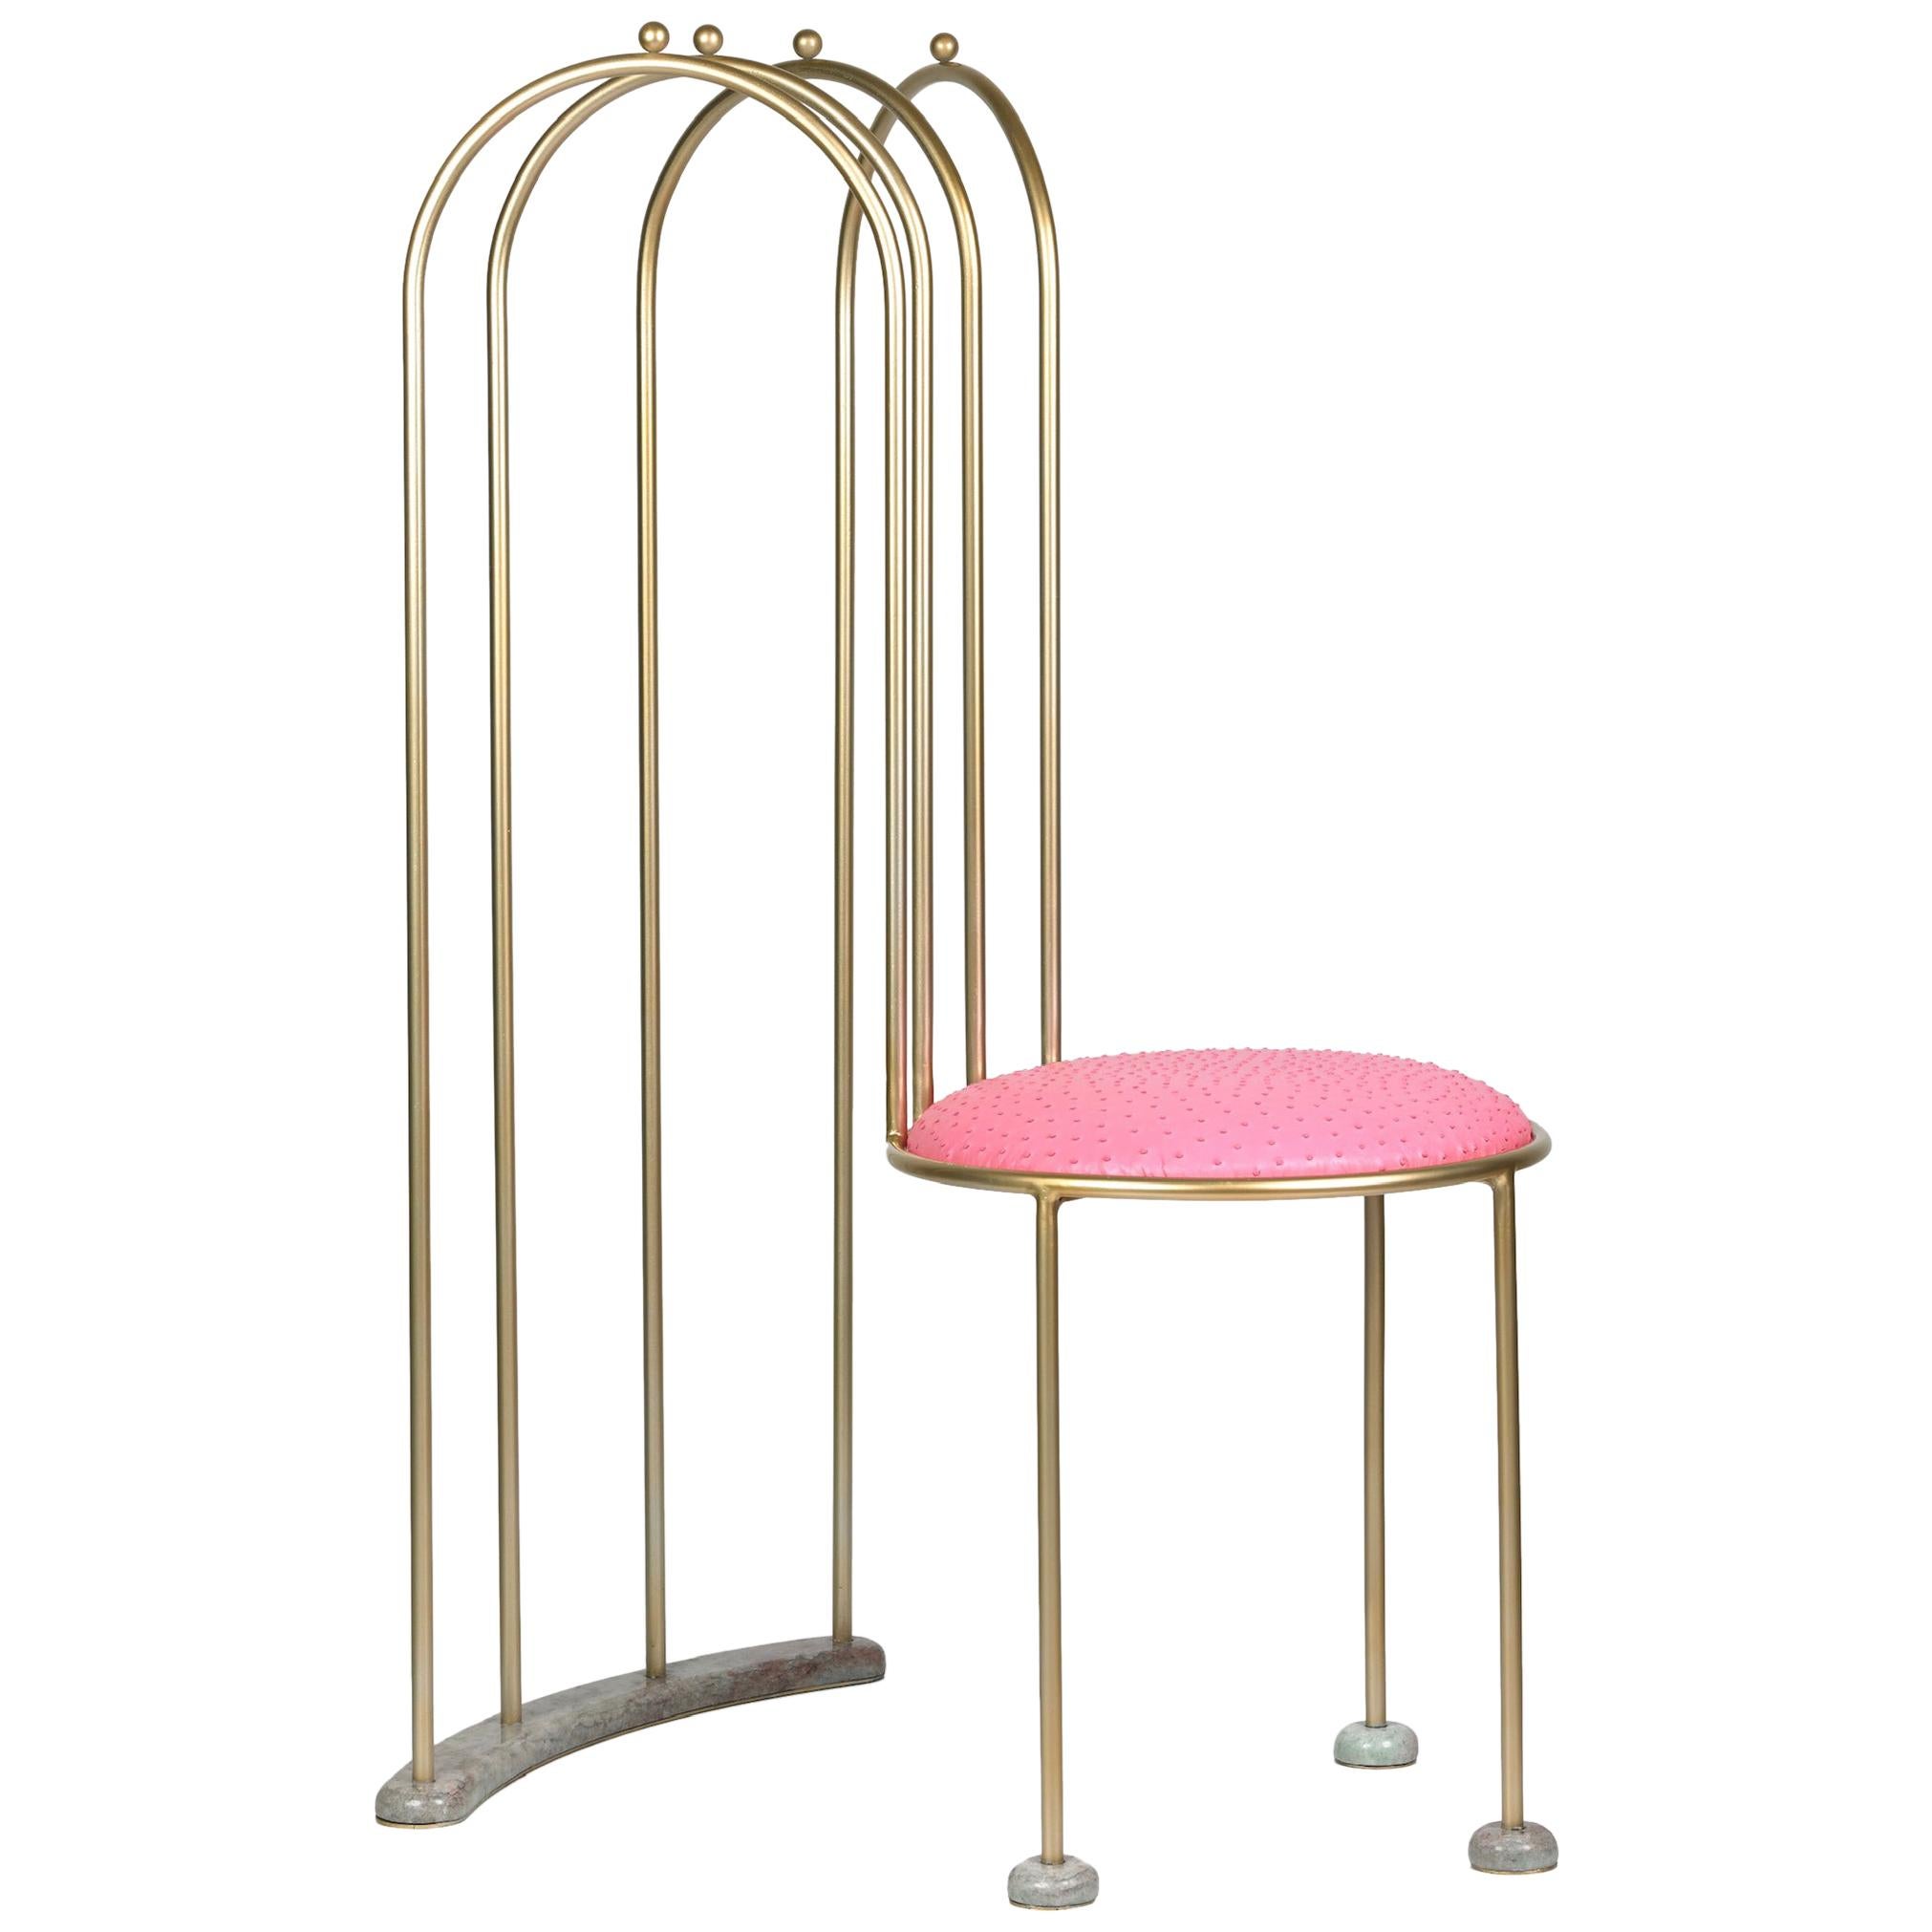 Kiss the Architect ‘Dine on Me' 2016 Chair Modern Art Brass Leather Side Pink